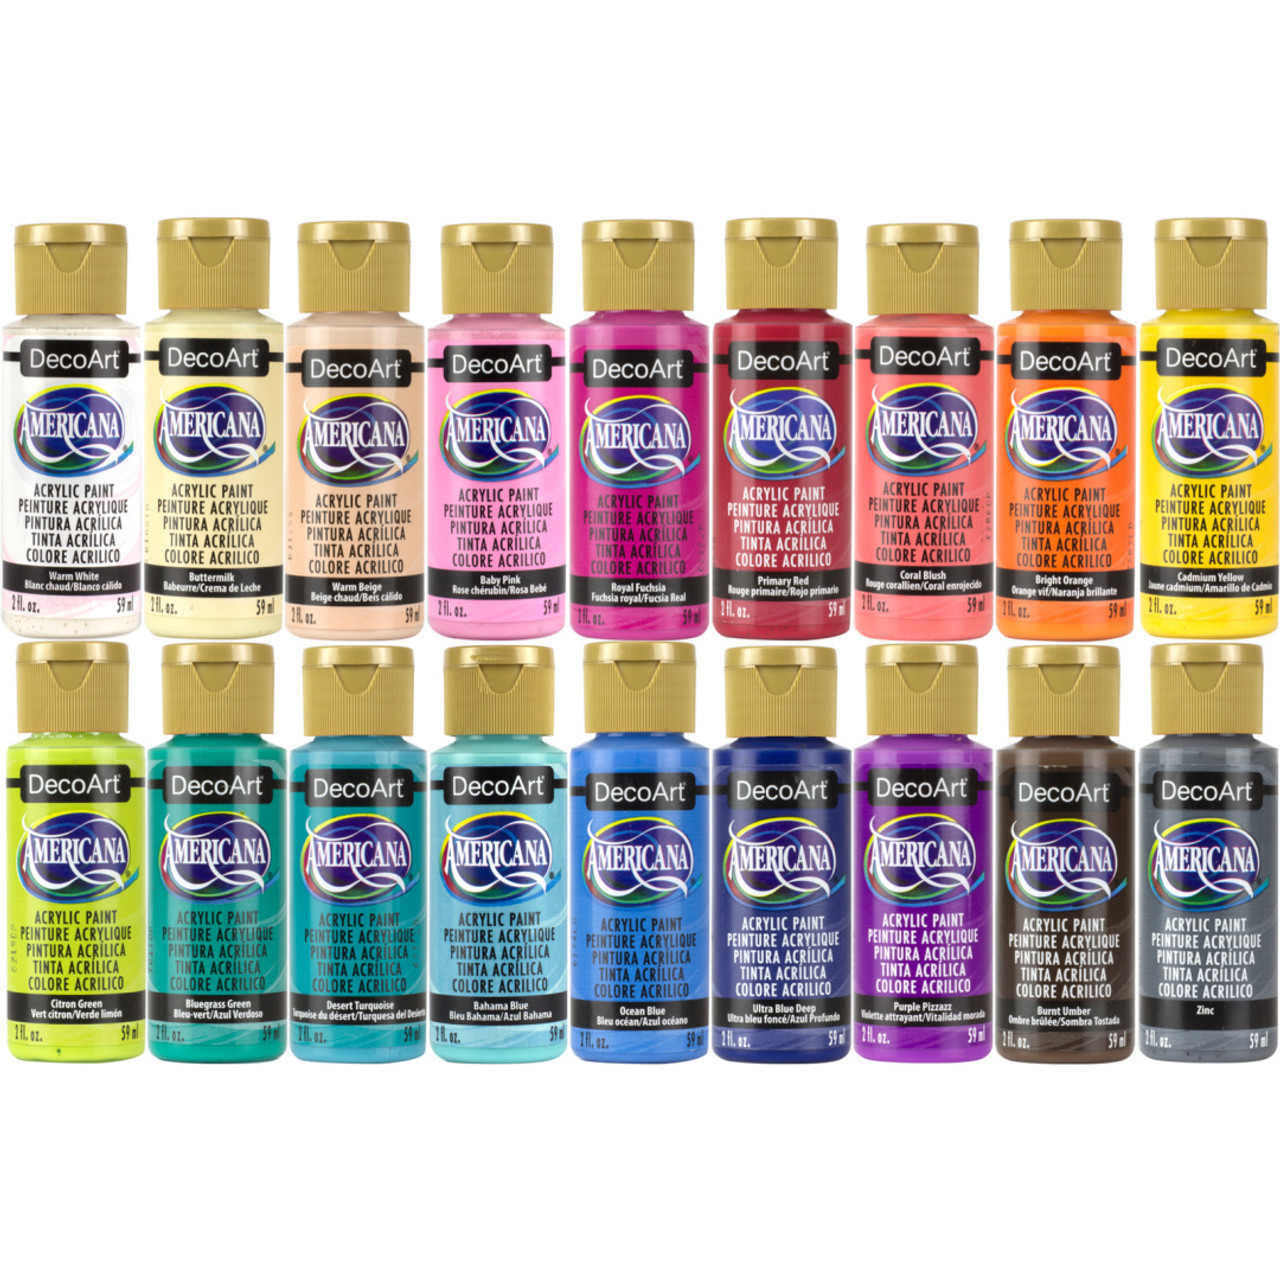 CLEARANCE DecoArt Acrylic Paint Pouring Value Pack - The Art Store